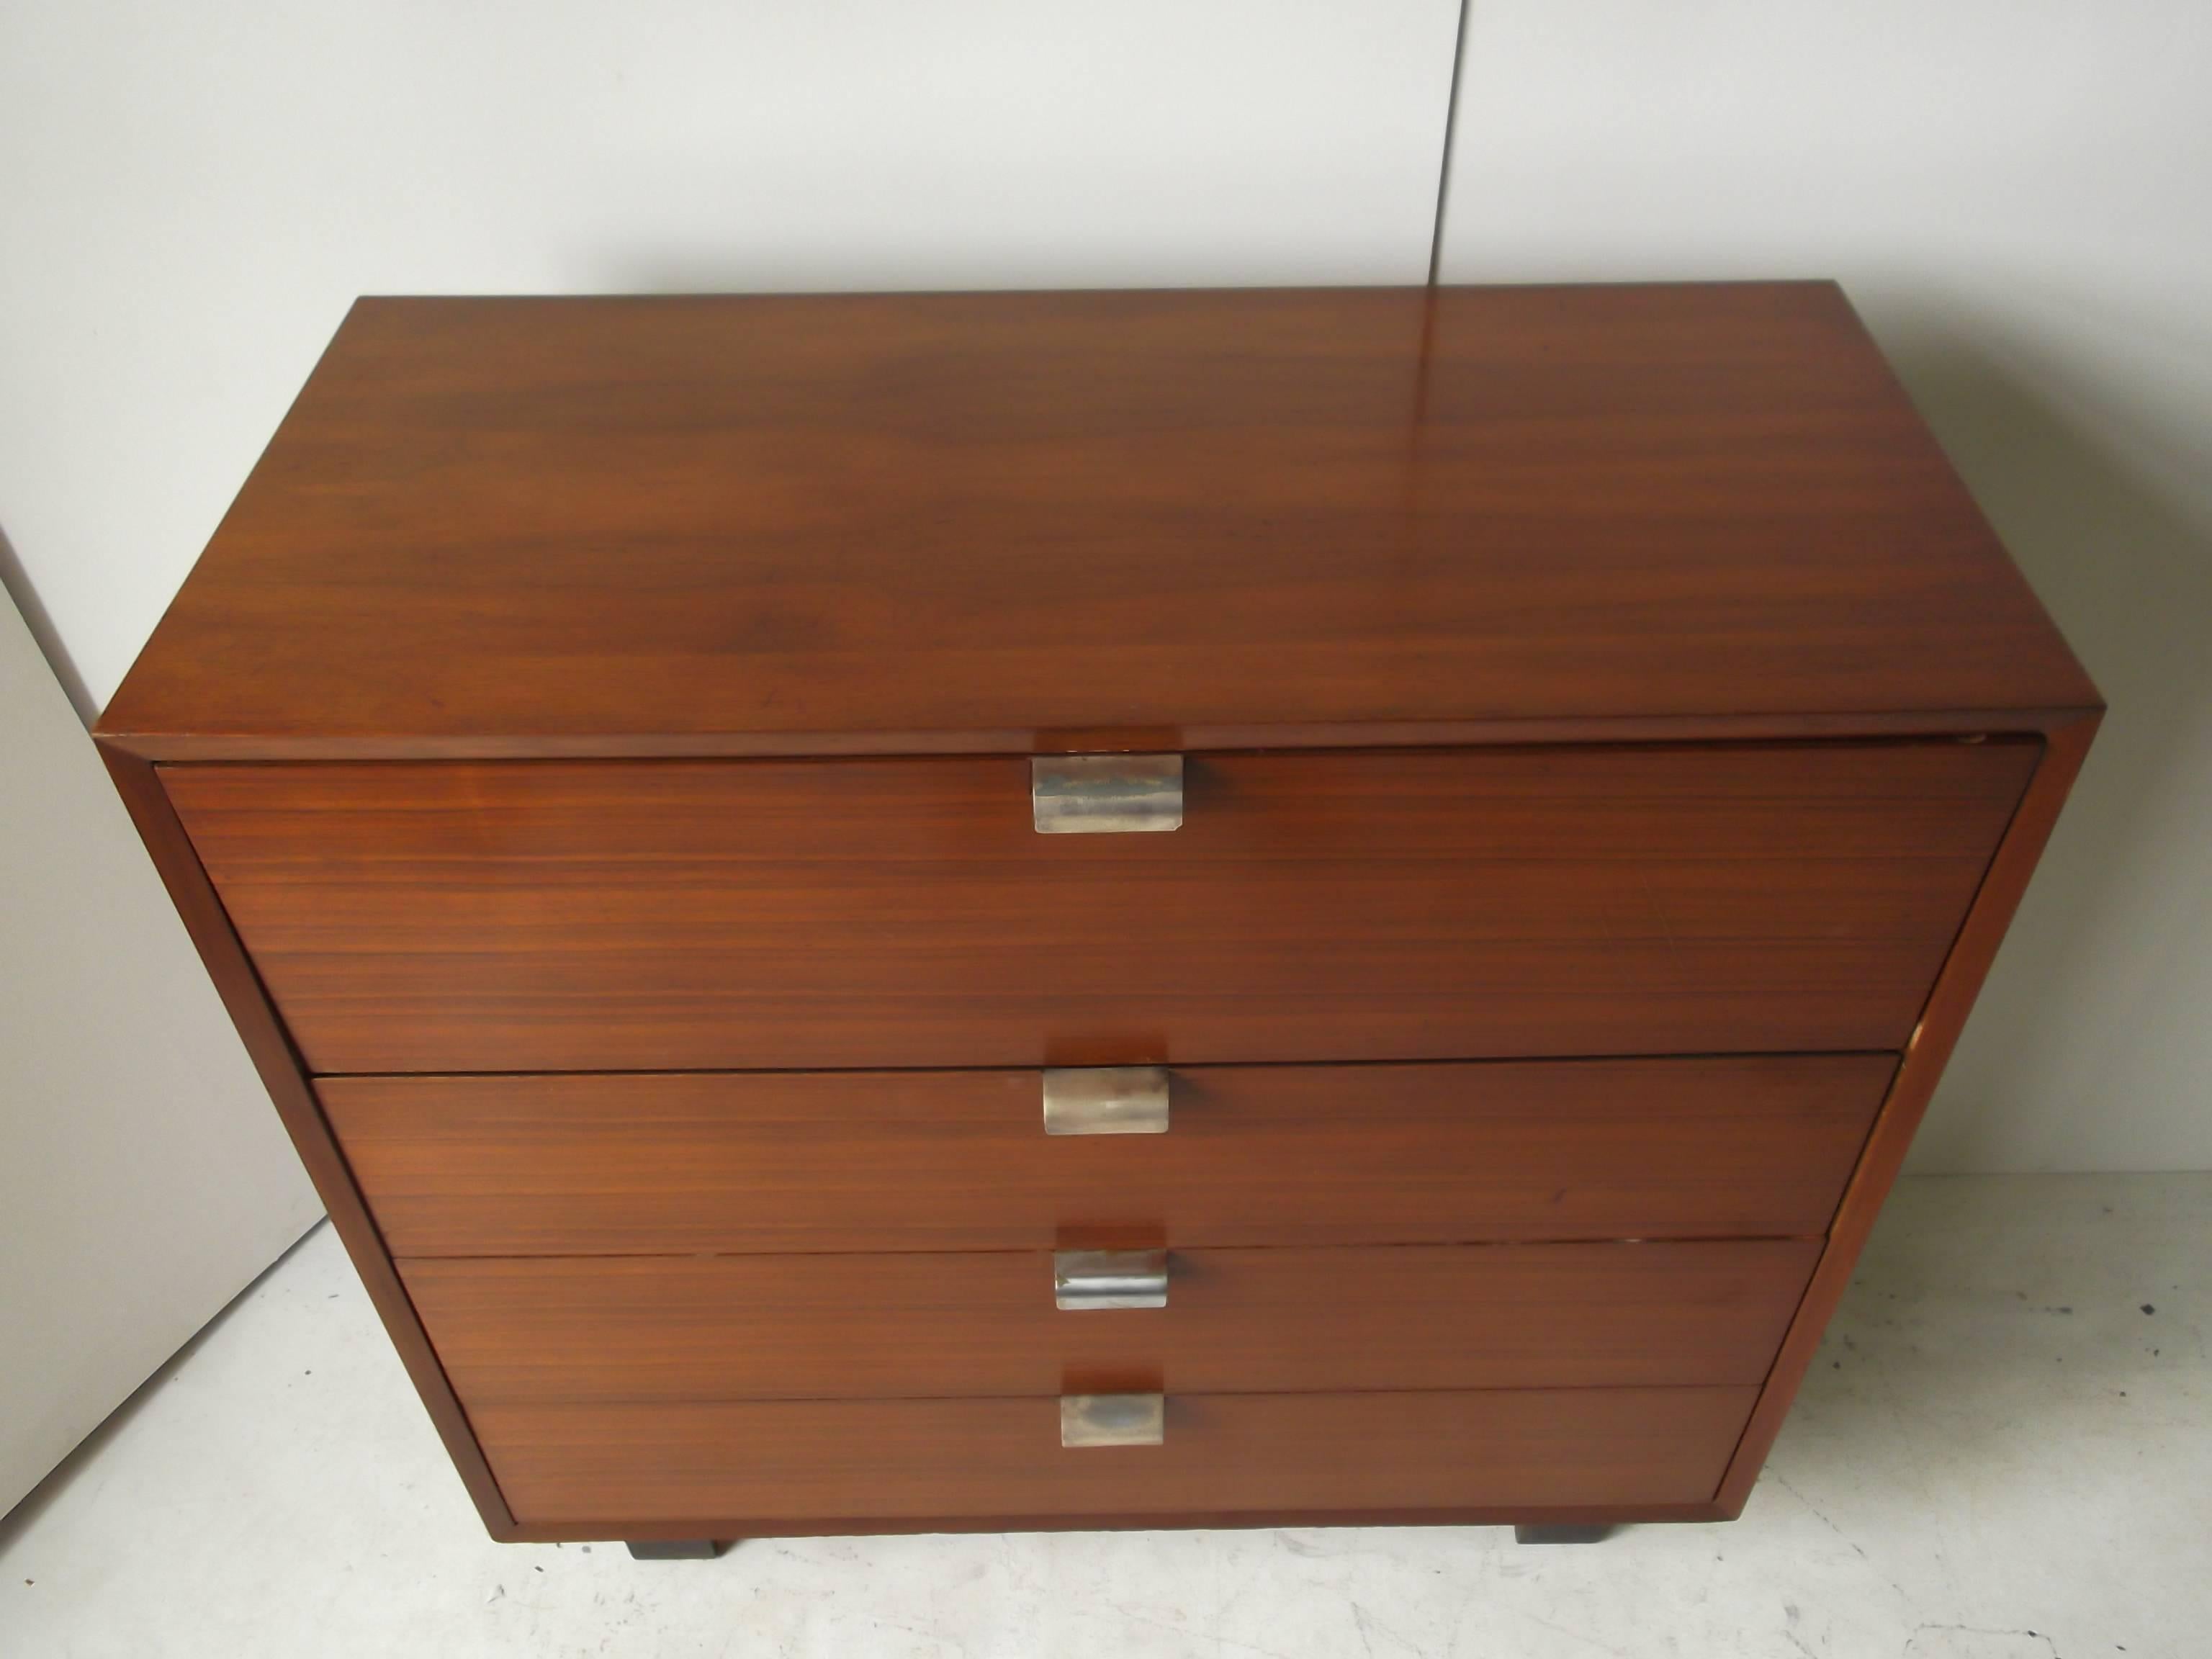 This is a fantastic grain walnut chest of drawers for Herman Miller, by George Nelson. It is from the basic cabinet series, BCS. It features a top pull-out, drop-front desk, with cubby holes to inside. It has a 1950s. Signed George Nelson foil